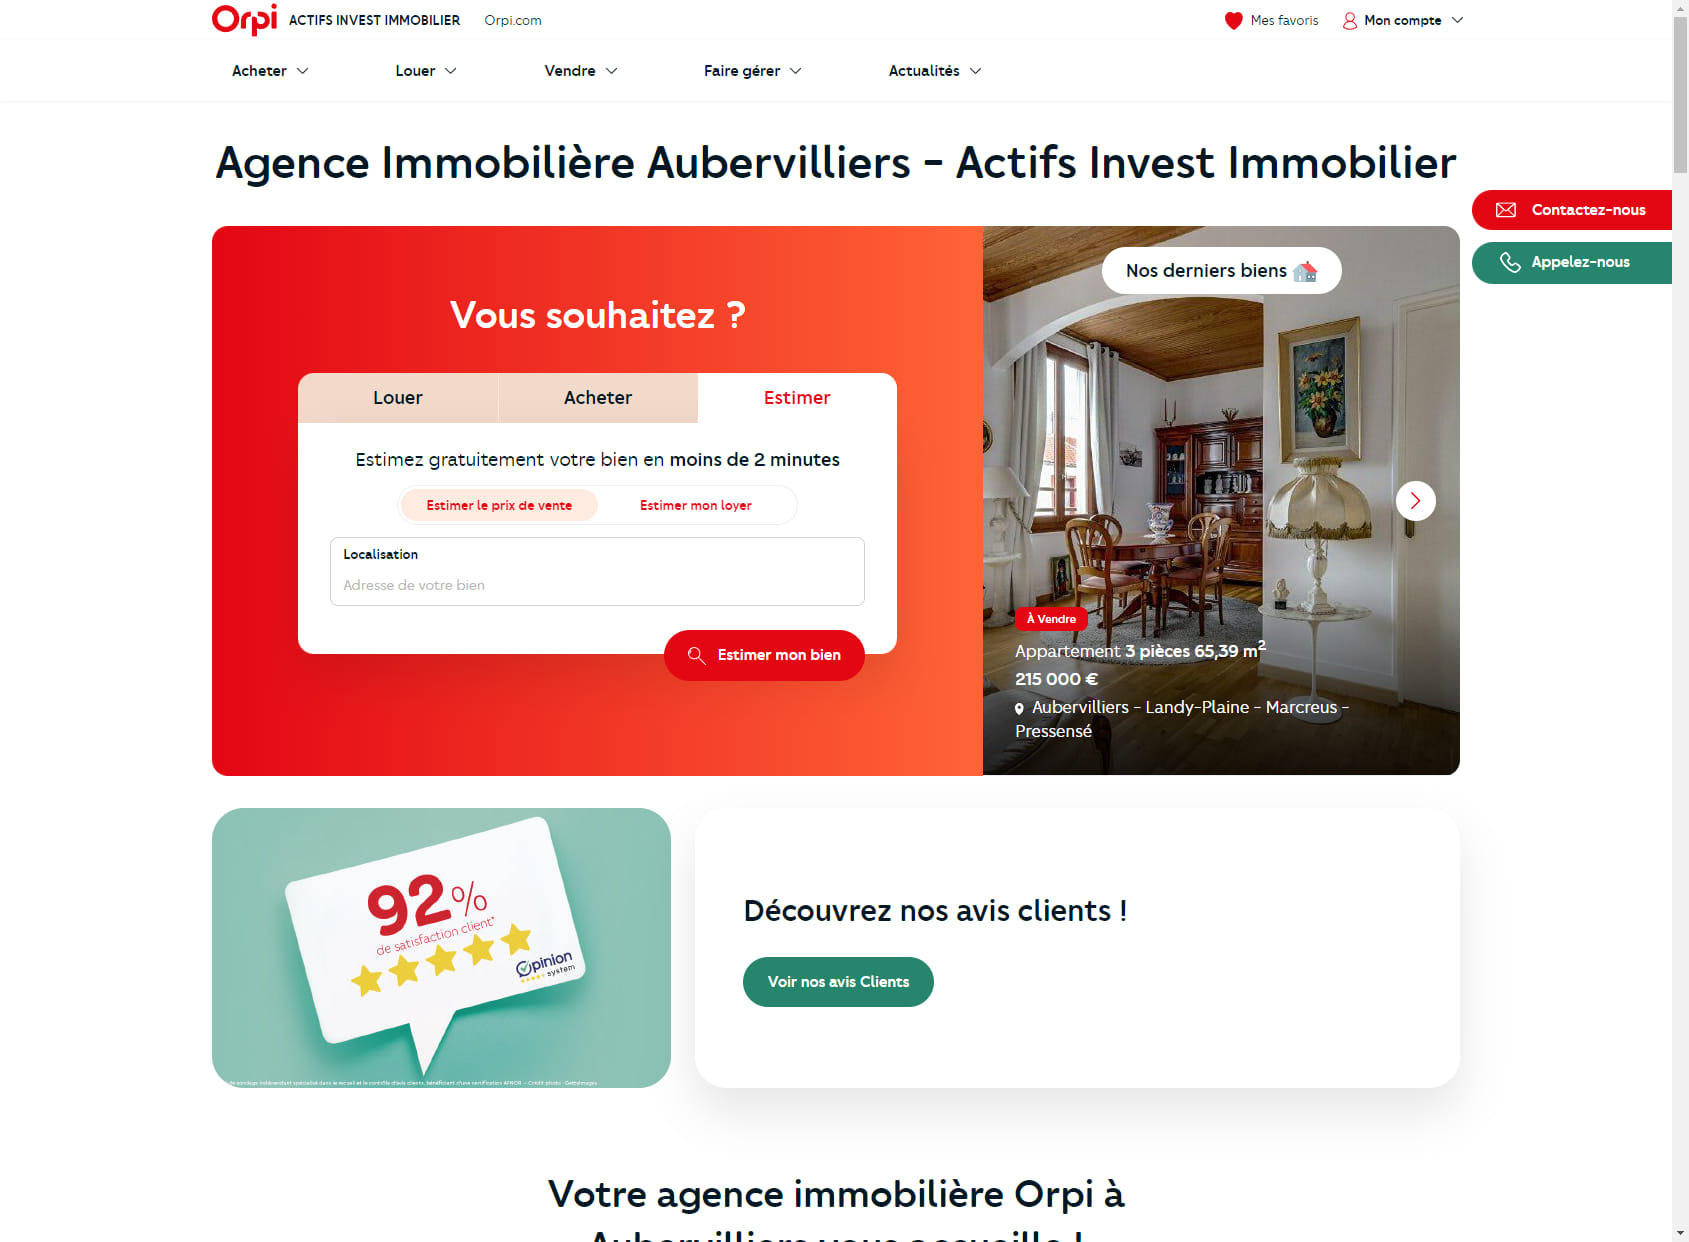 Agence immobilière Orpi Actifs Invest Immobilier Aubervilliers